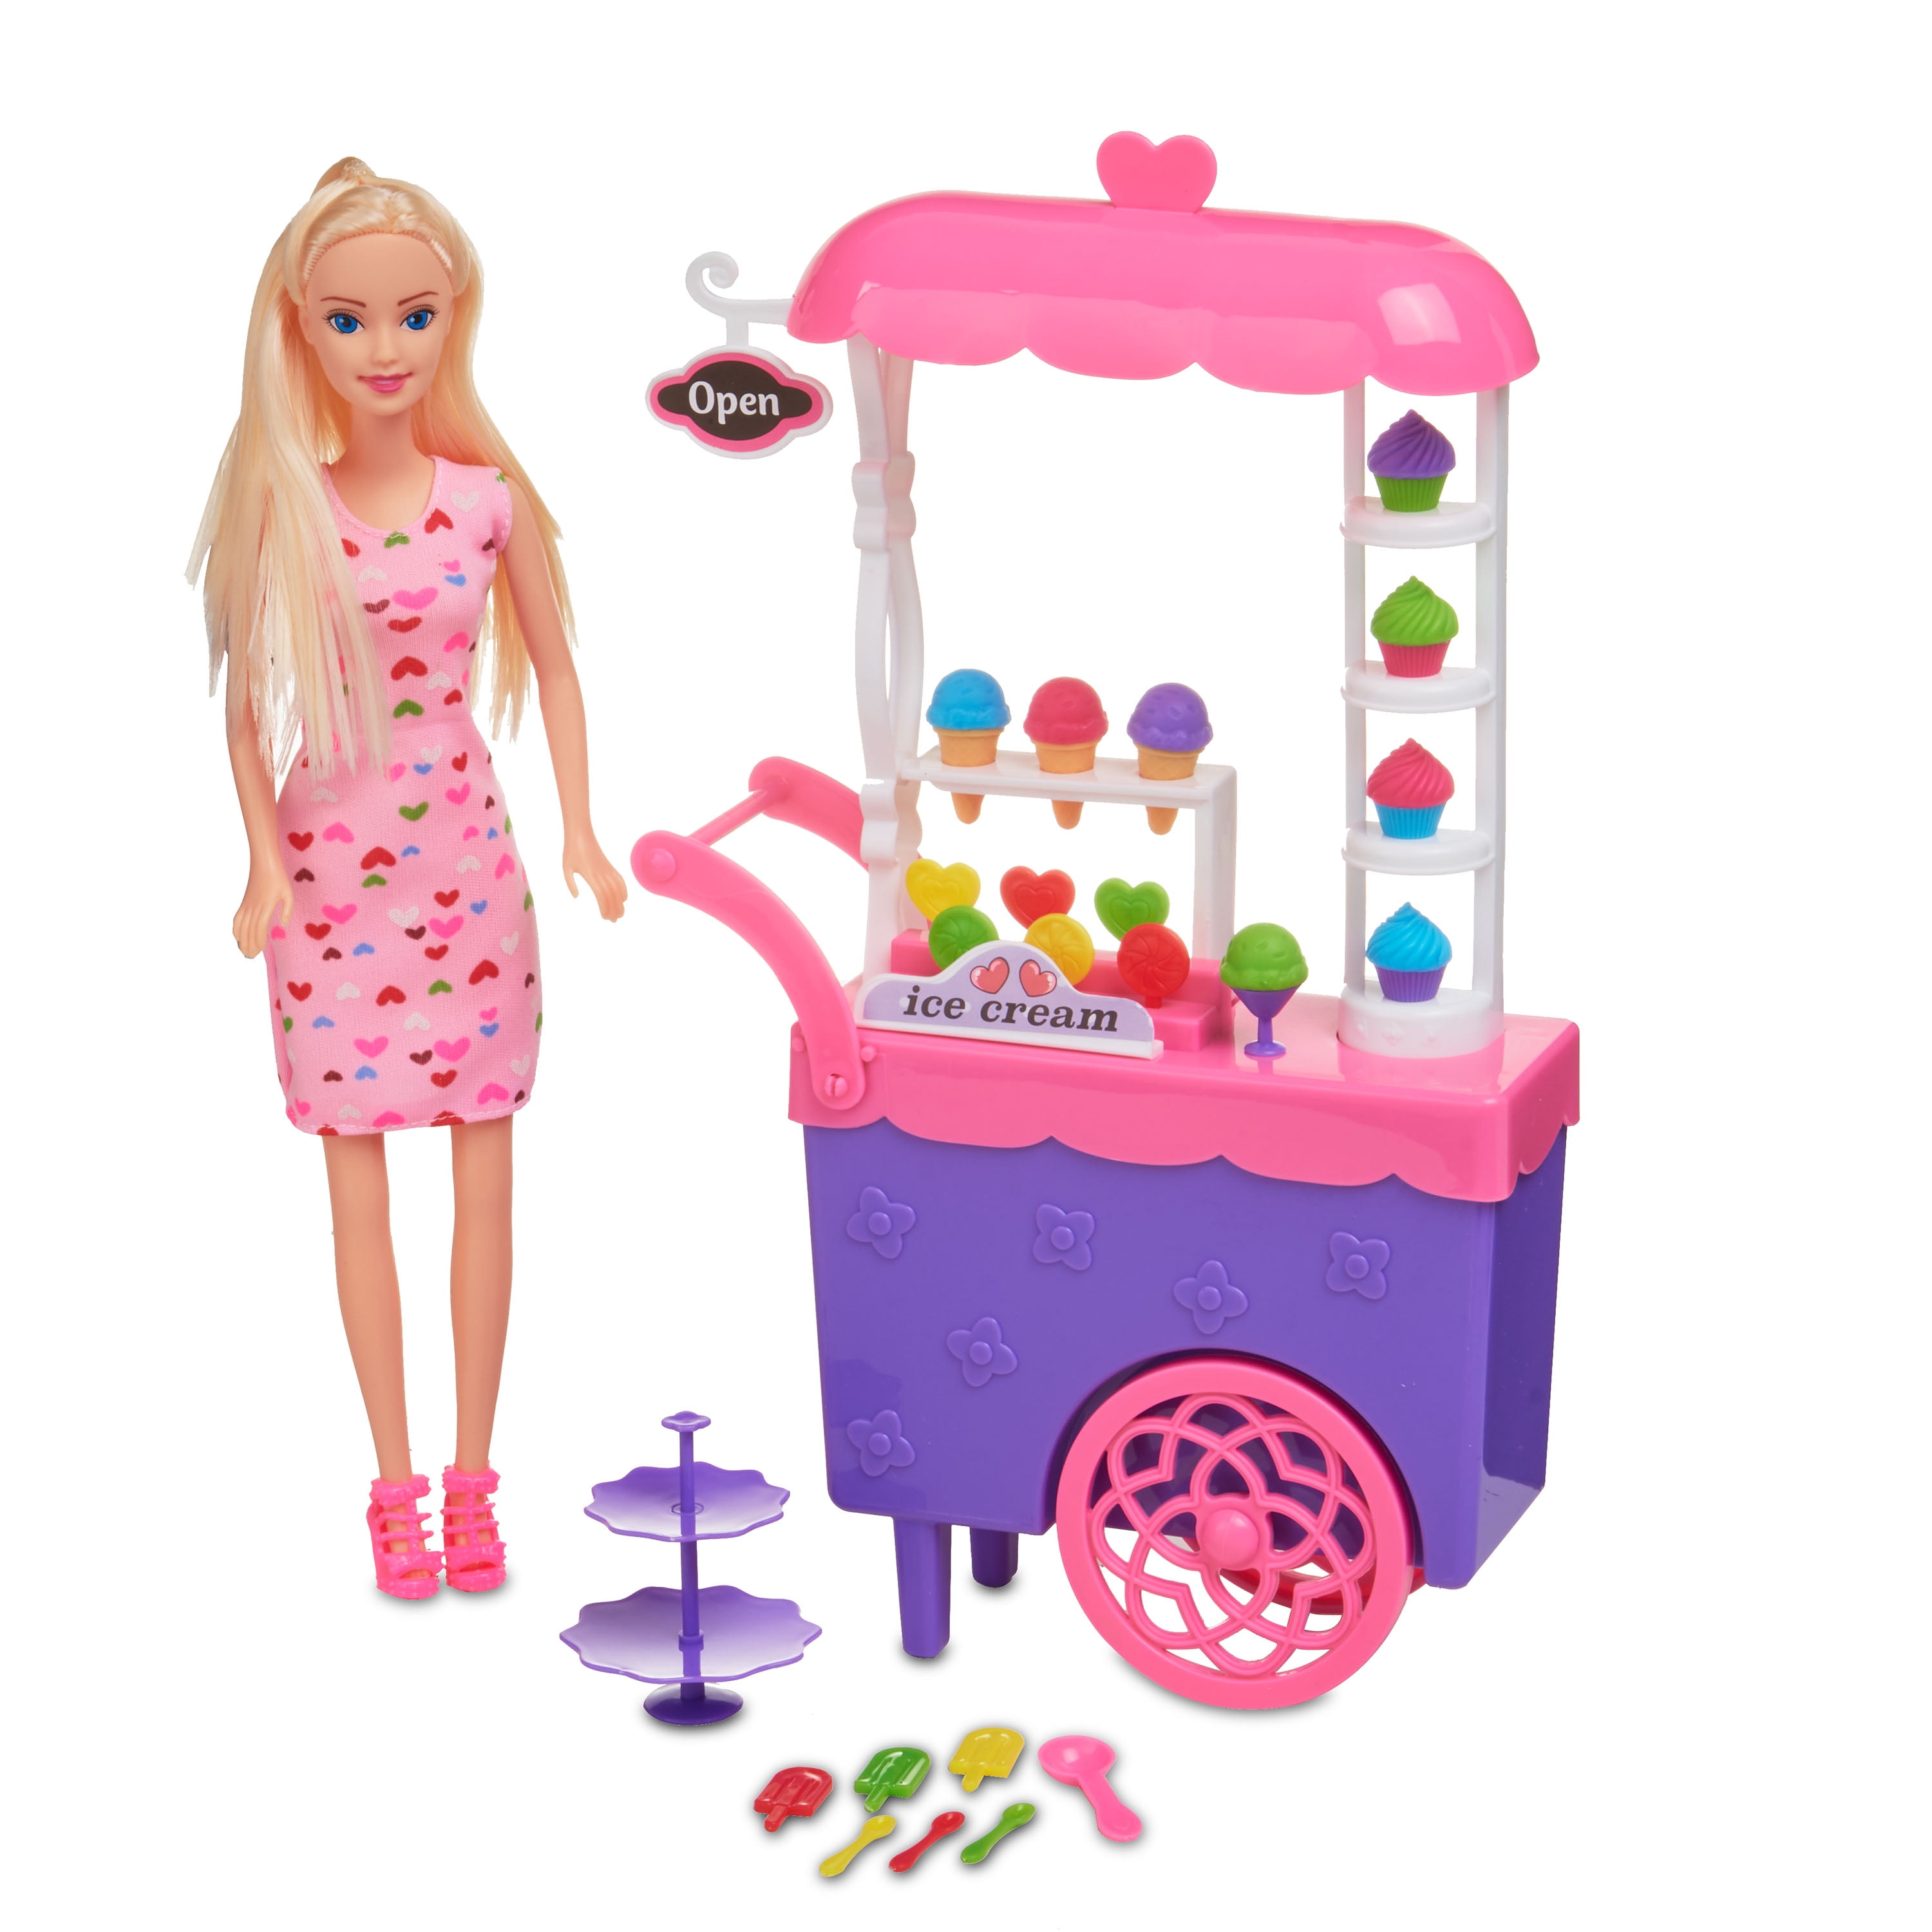 My Life As Doll Gumball Machine Toy Lights Sounds Coin Play Imagination 26 Piece 